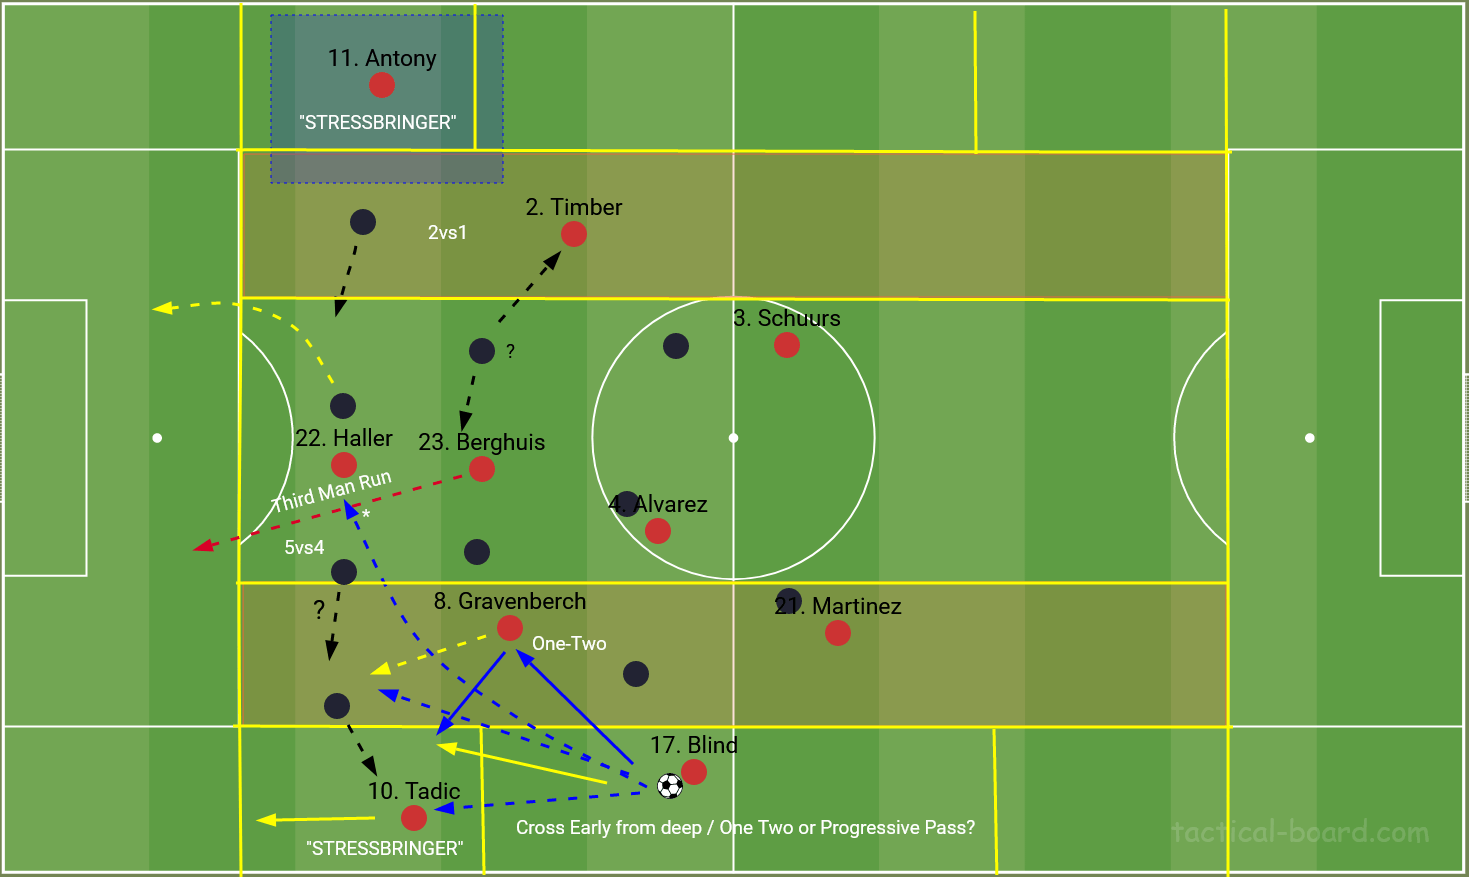 Erik ten Hag's principles of play: stretching play by using Stressbringers